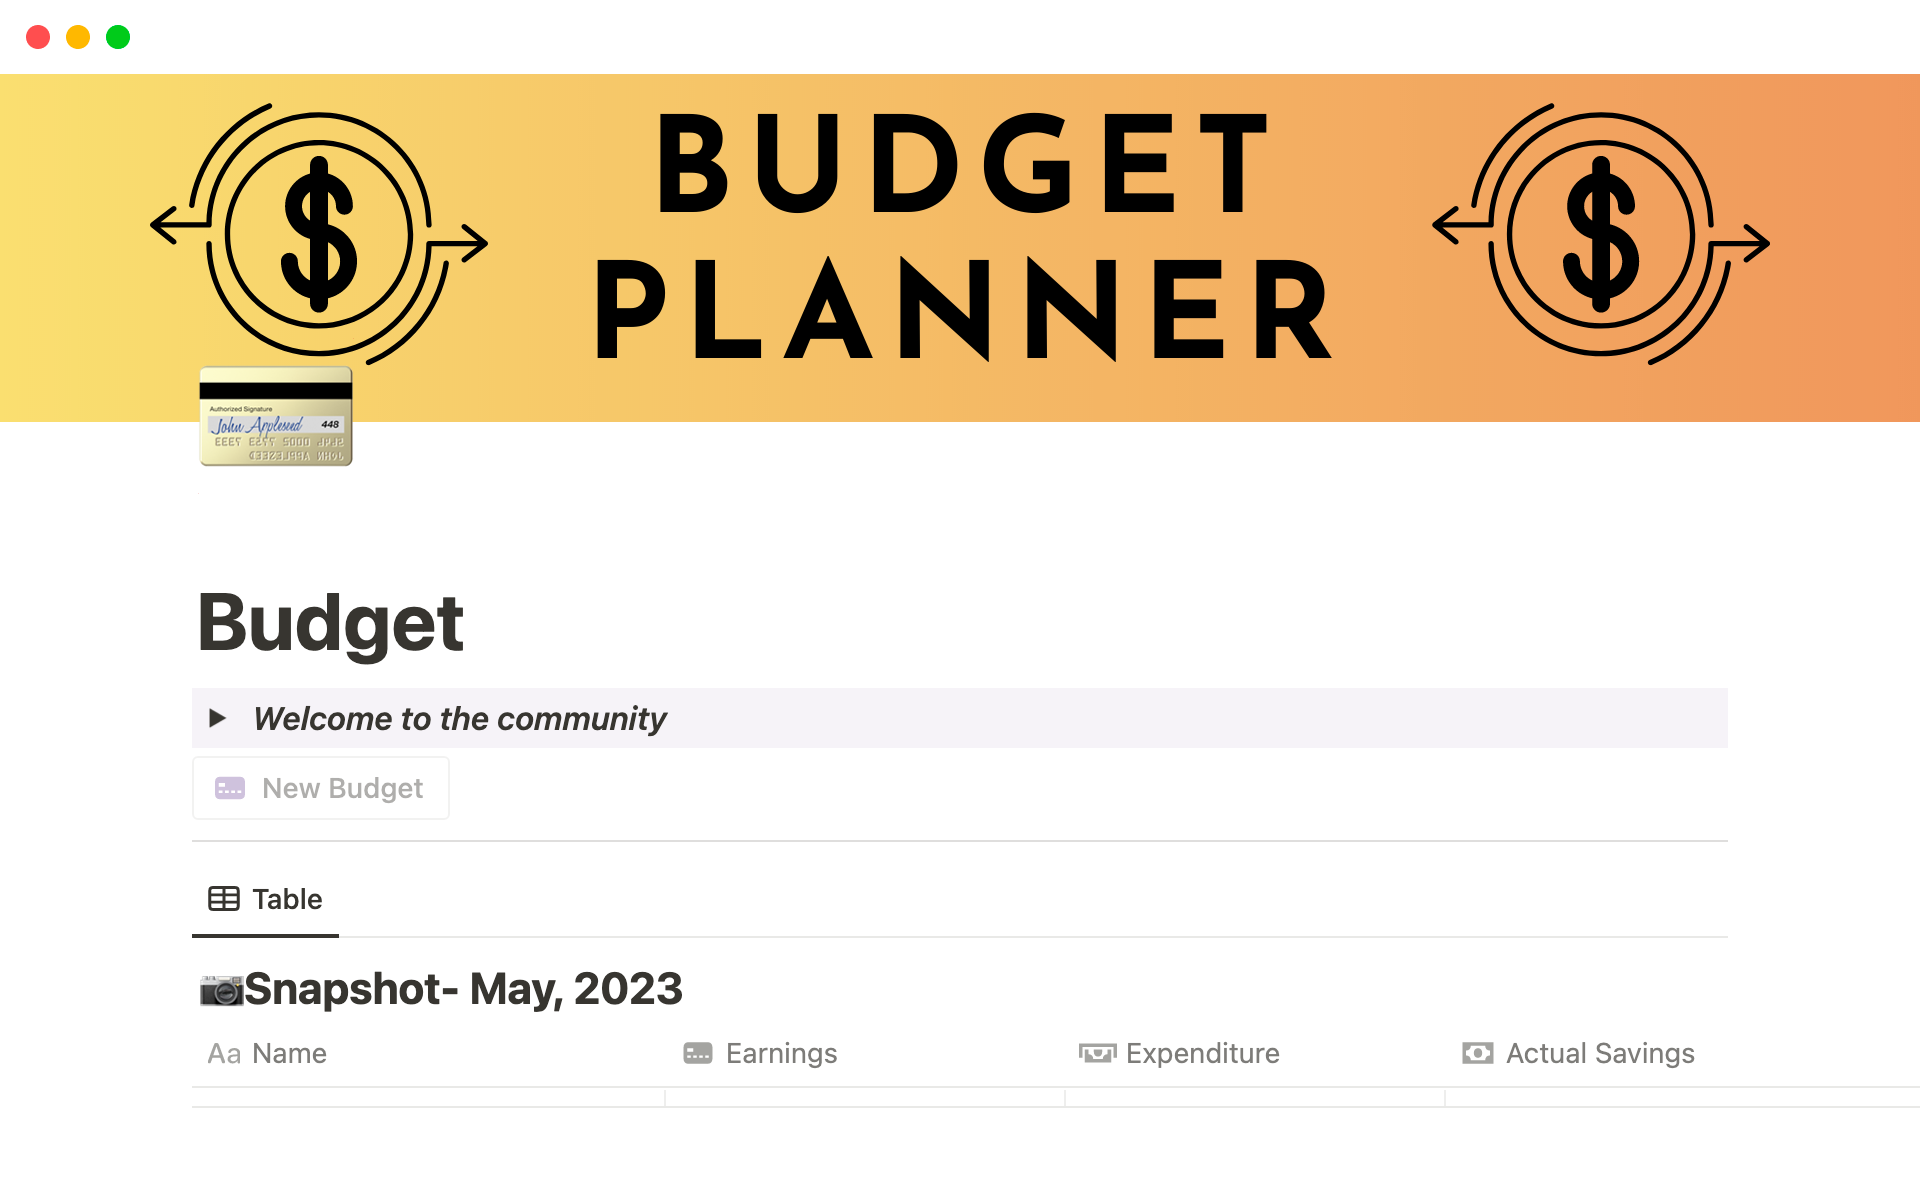 Make budget planning effective and efficient